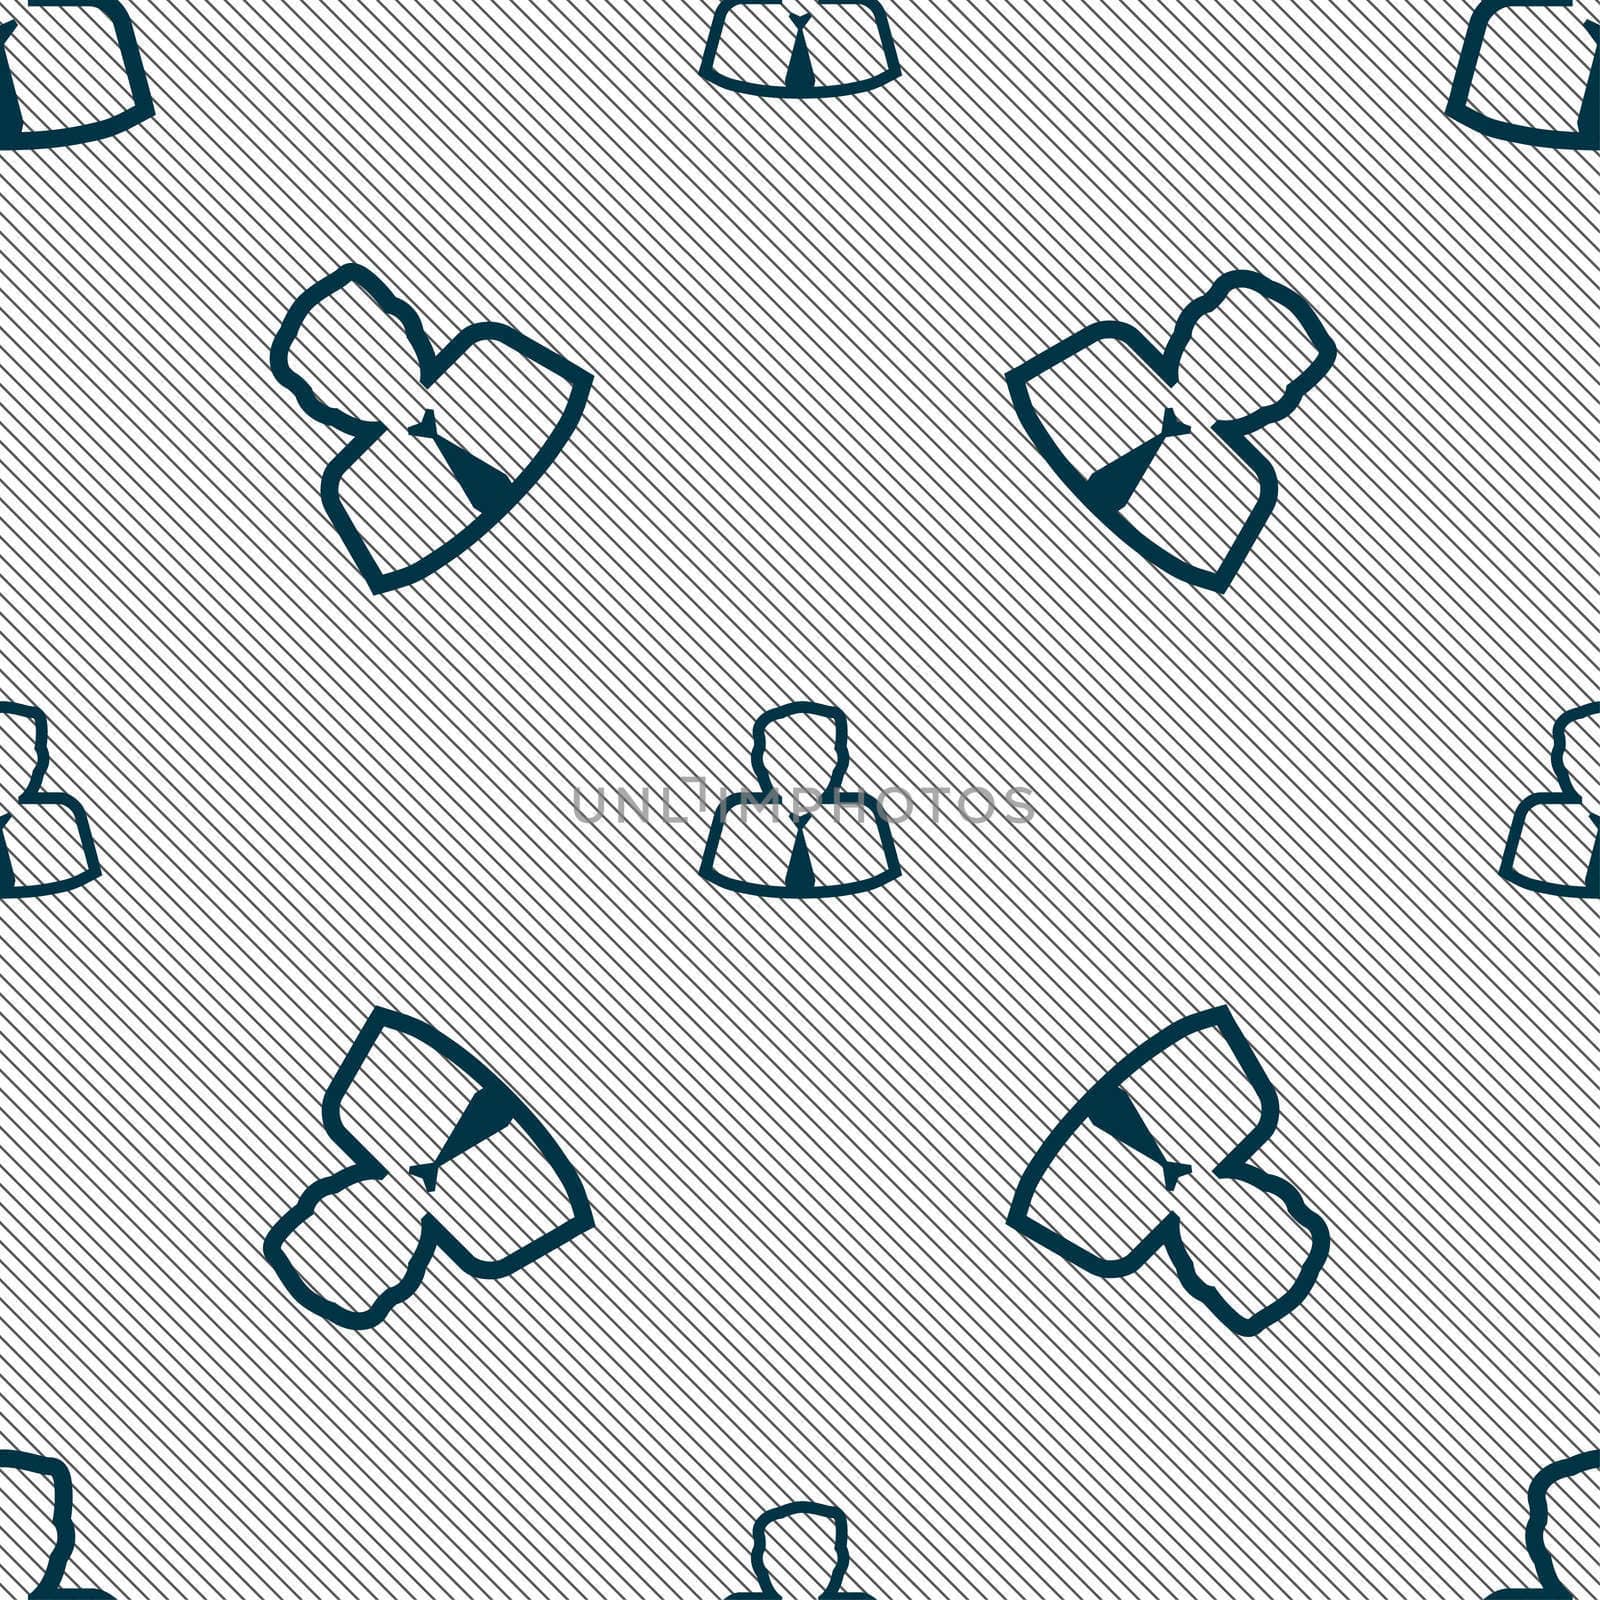 Avatar icon sign. Seamless pattern with geometric texture. illustration